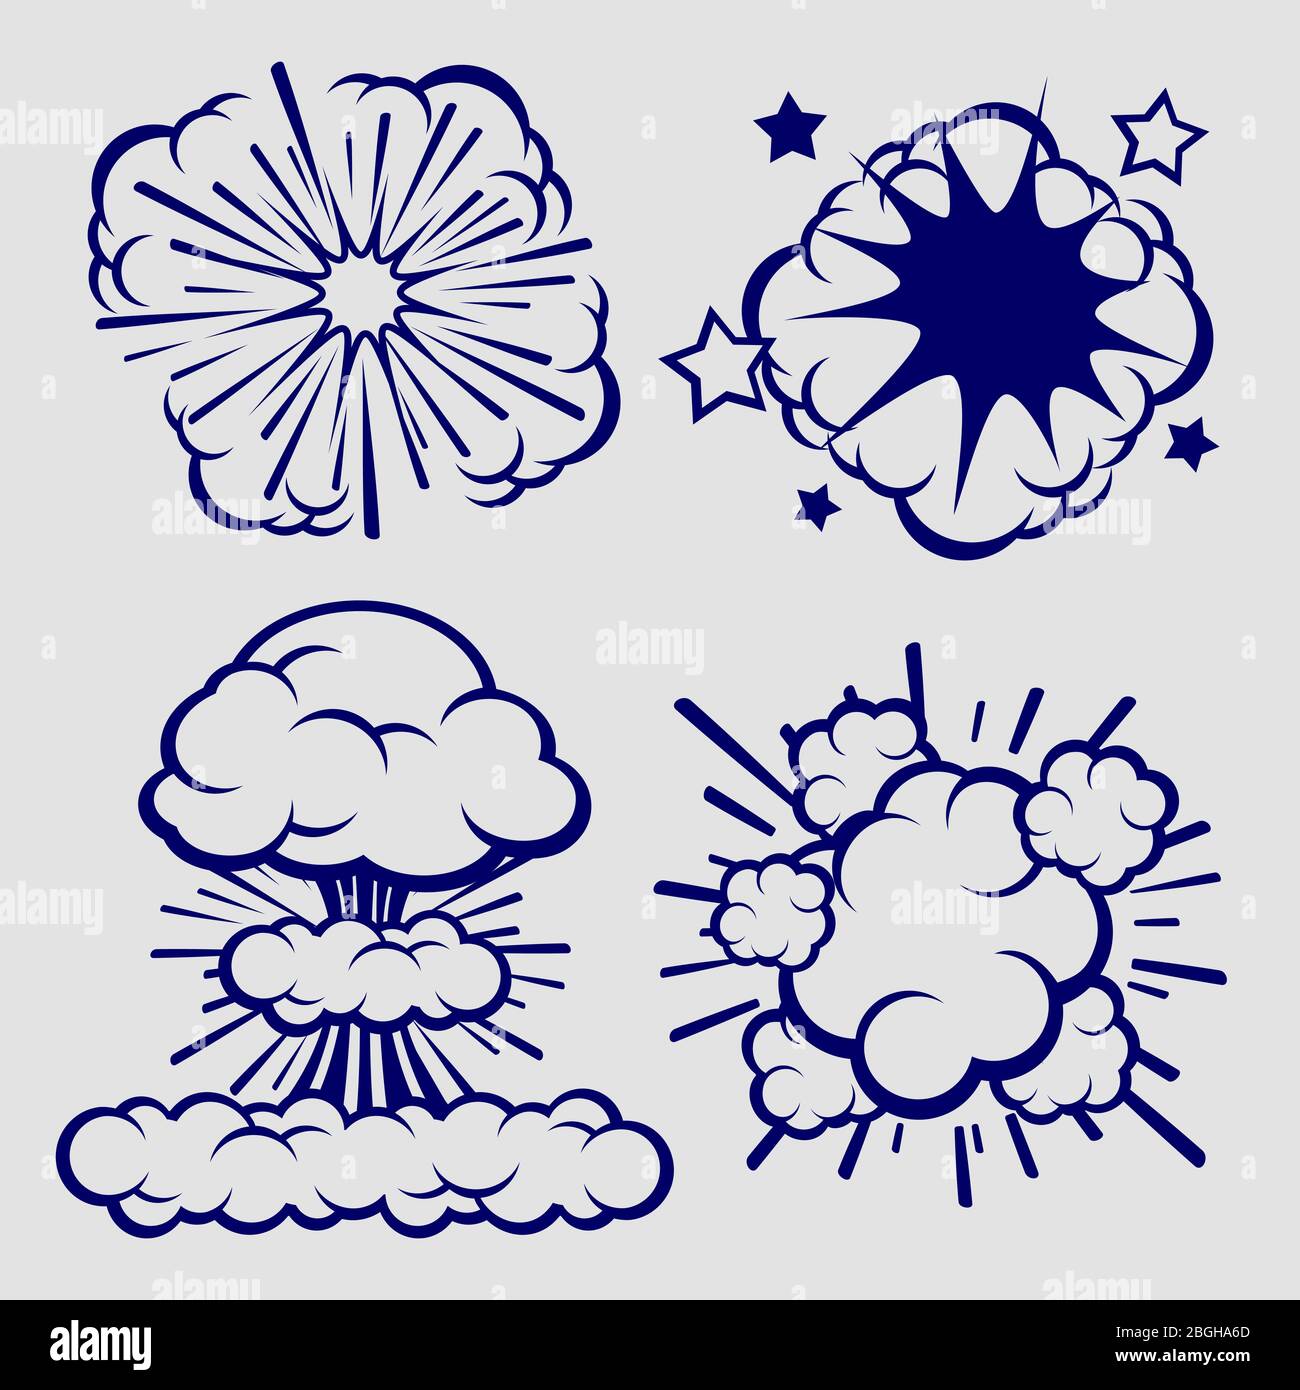 Ballpoint sketch explosion clouds isolated on grey background. Vector illustration Stock Vector